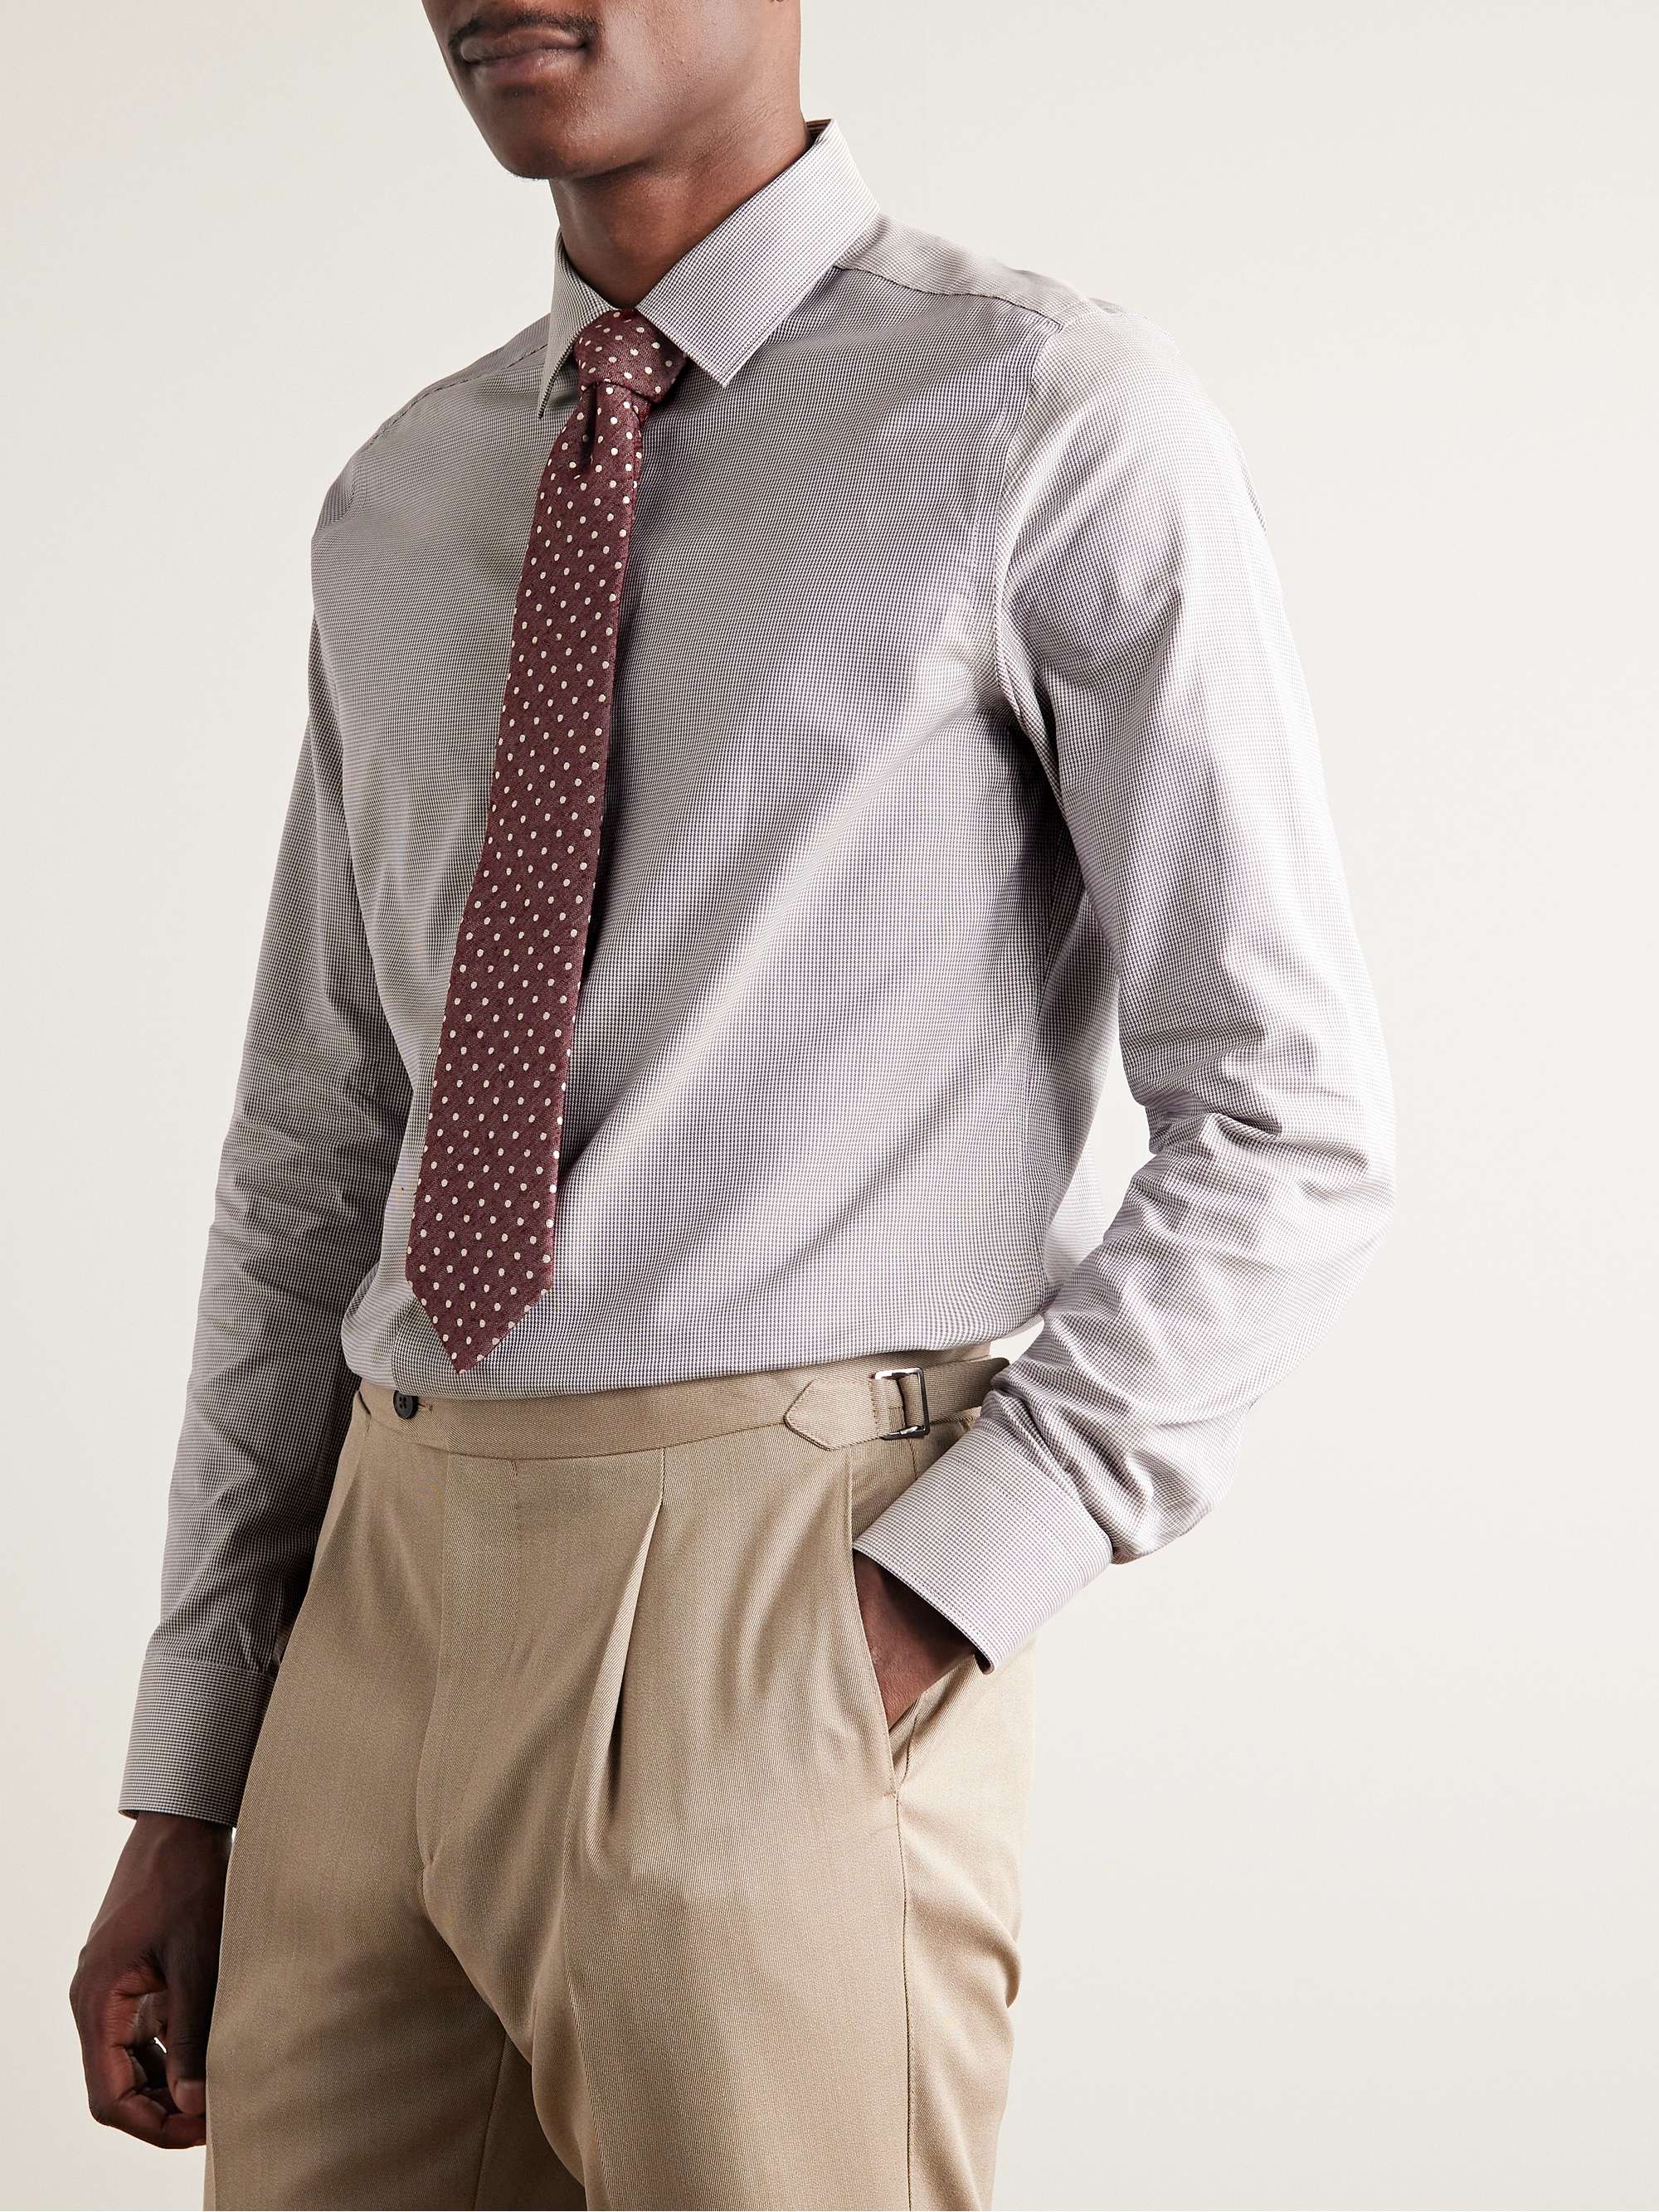 CANALI Slim-Fit Puppytooth Impeccabile Cotton Shirt